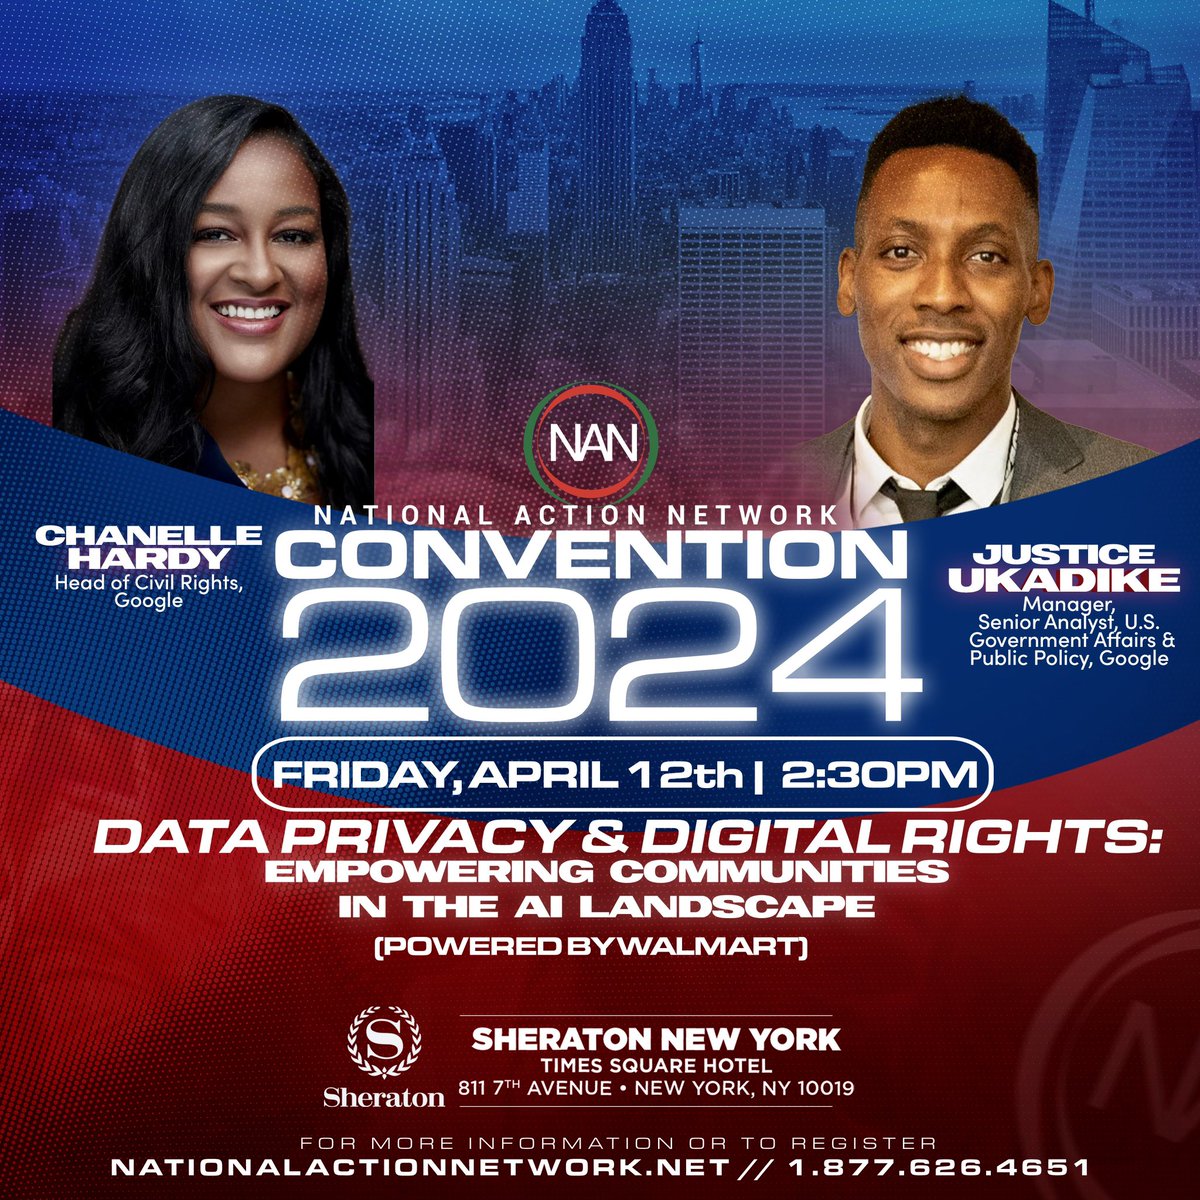 Don’t miss the National Action Network (NAN) 2024 Convention April 10-13, beginning today! Visit nanconvention2024.com to view the 4 day schedule. 📅 April 10-13, 2024 ⏰ 8am ET 📍Location: @sheratontimessq Register today at NANCONVENTION2024.com #NANCONV2024